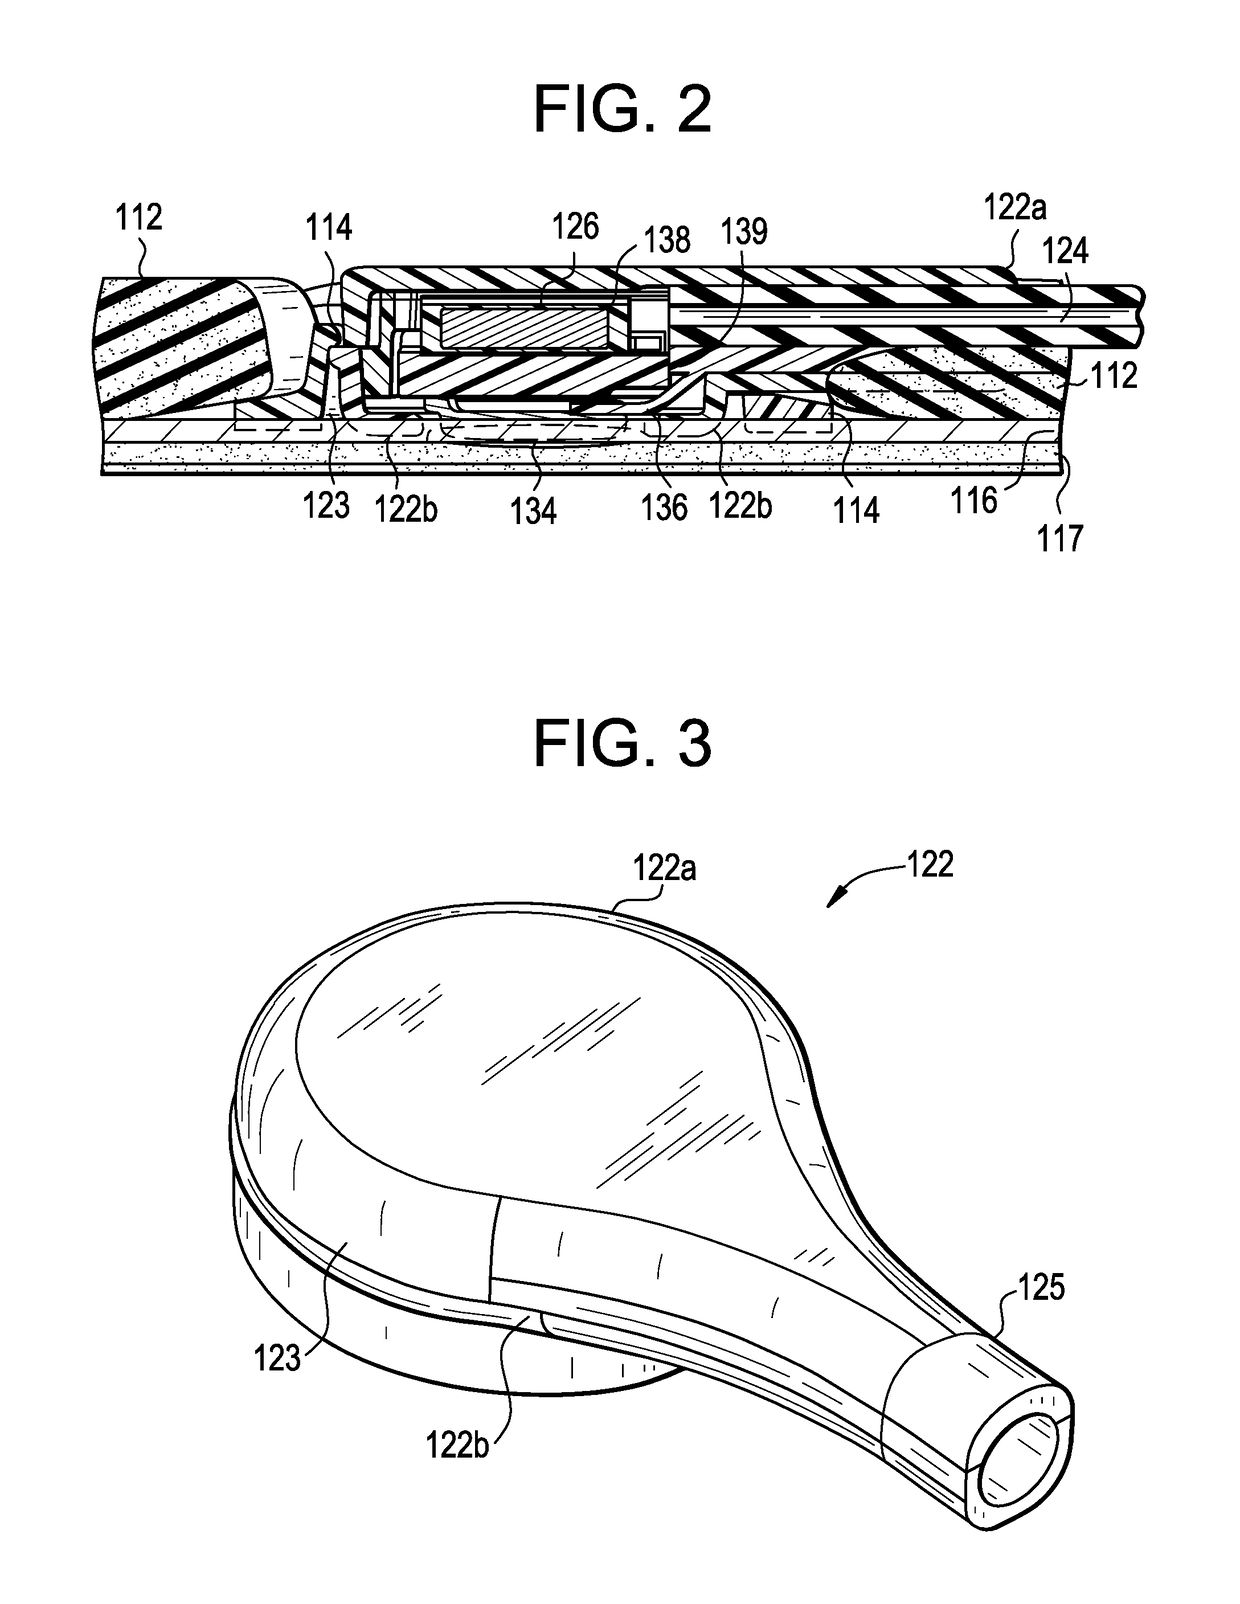 Patch and sensor assembly for use in medical device localization and mapping systems